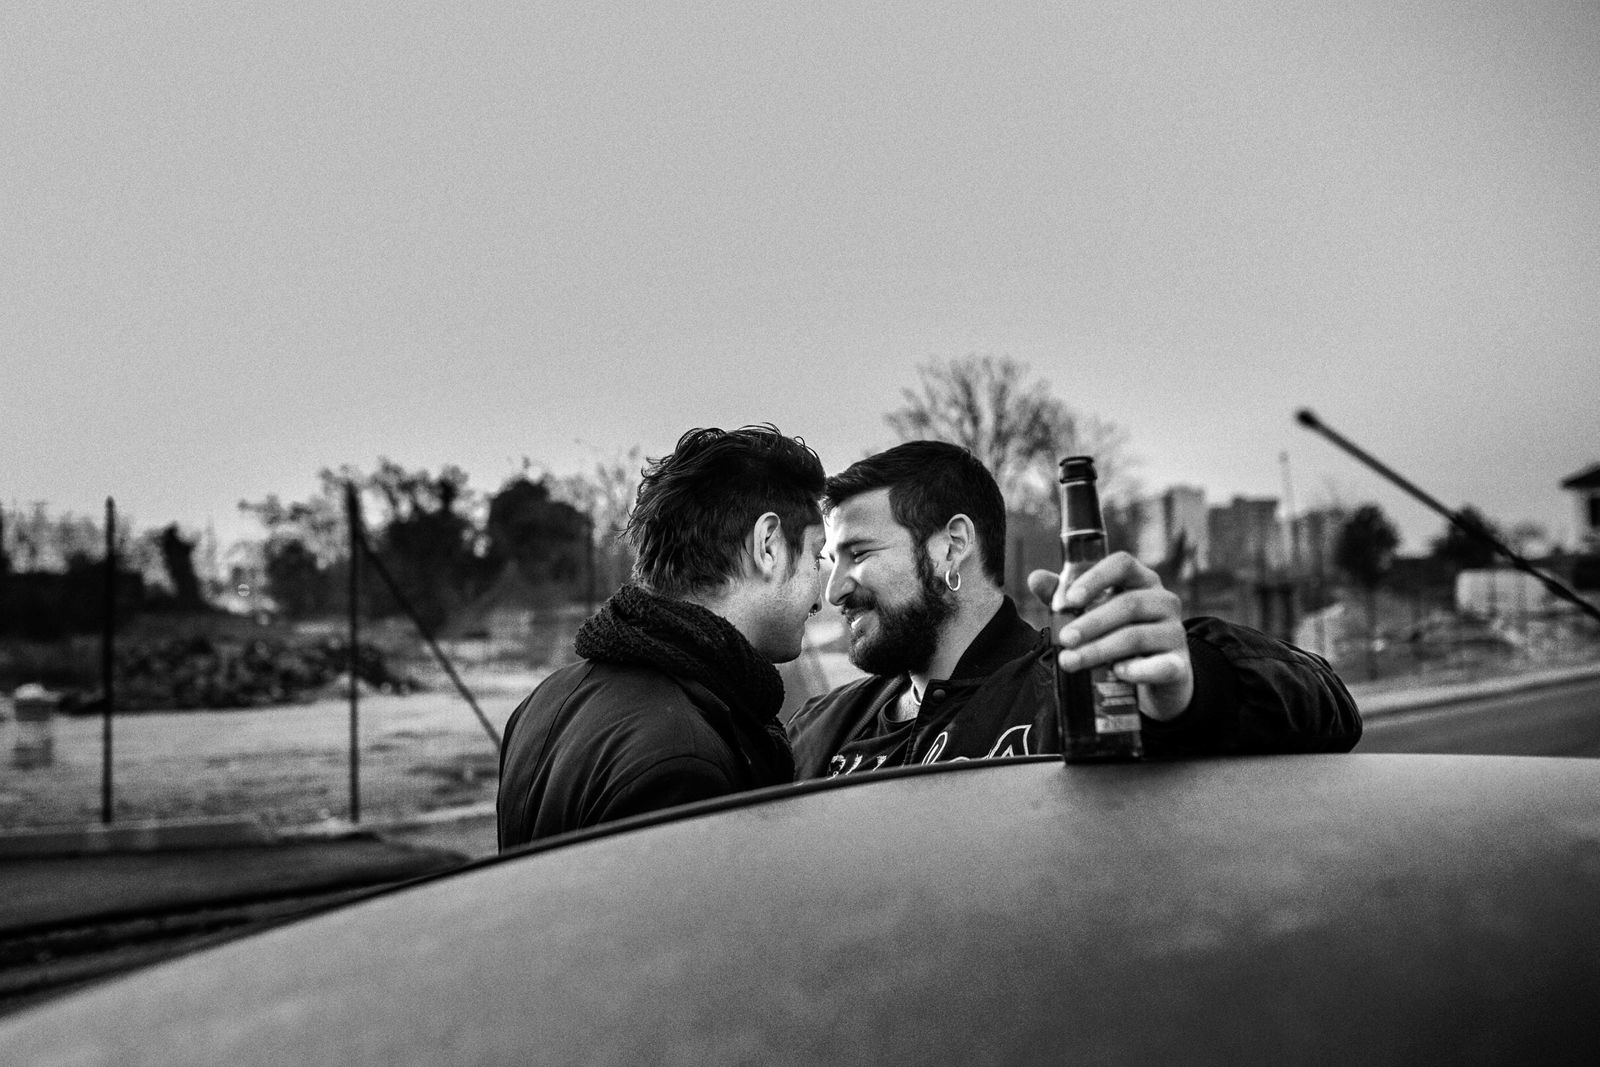 © Gianluca Abblasio - 2015 Rome - Italy. The Sun is raising. Time for the last beer with a friend.